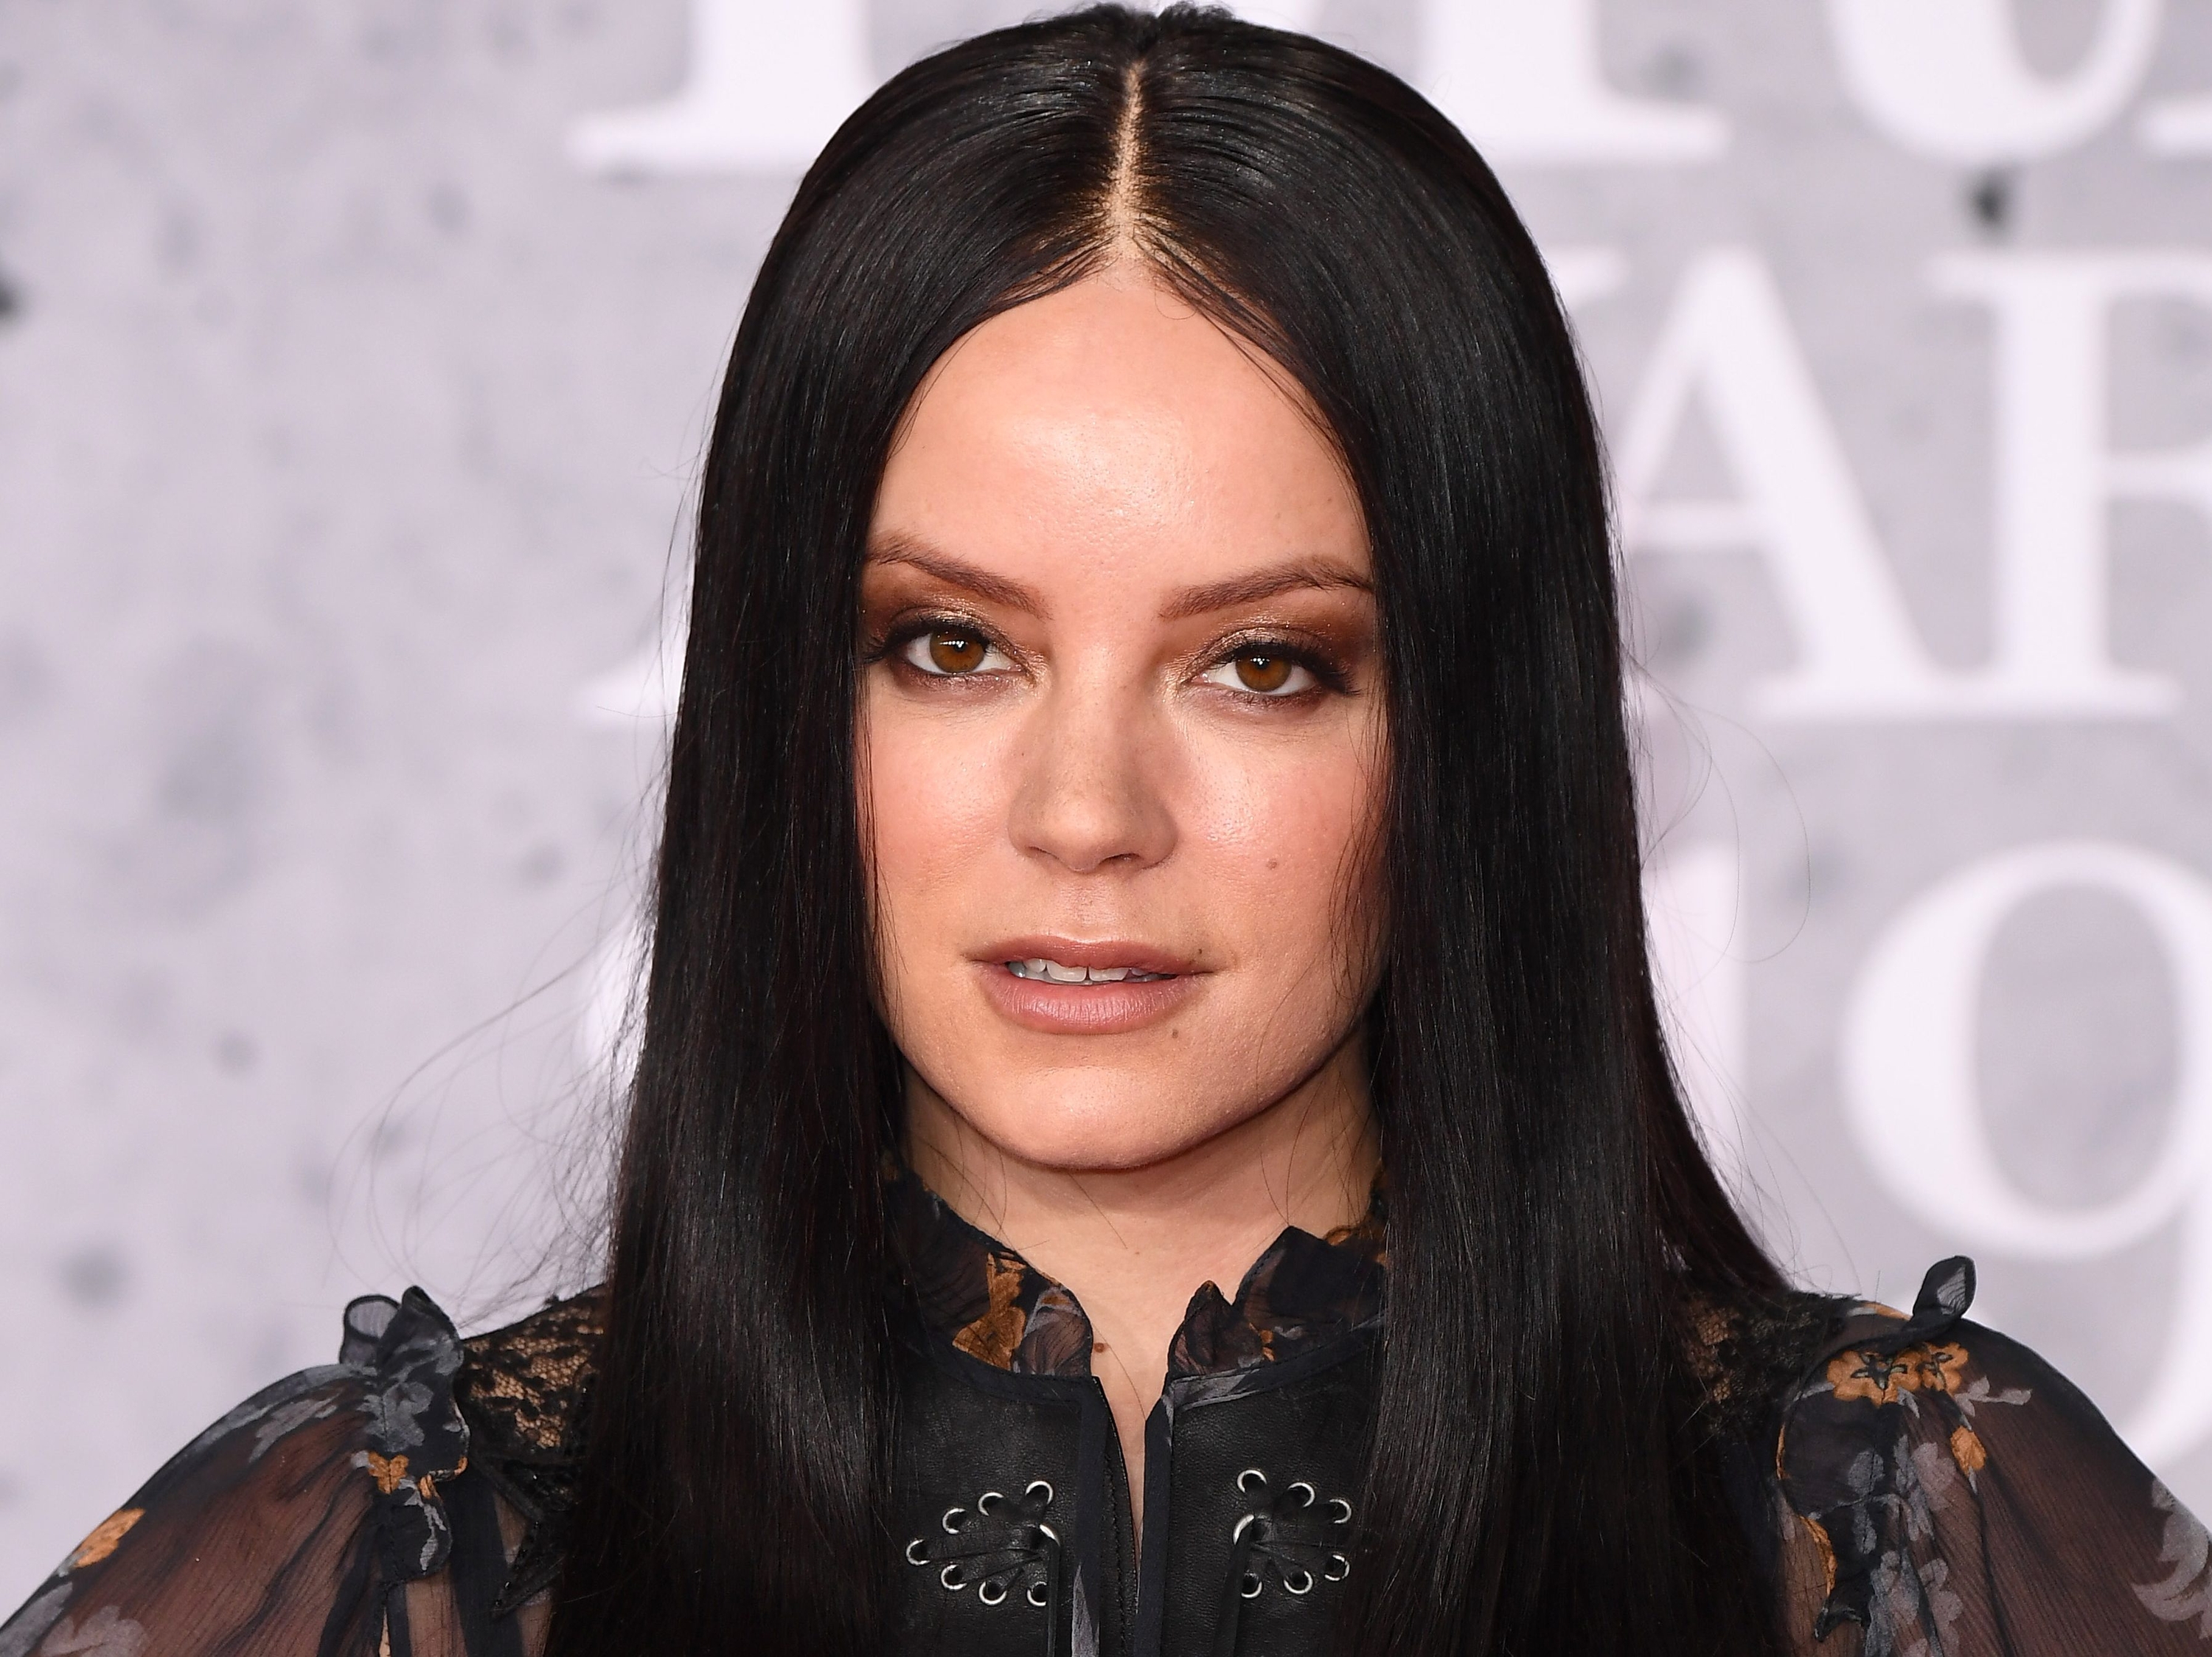 Lily Allen Nude - Lily Allen - latest news, breaking stories and comment - The Independent